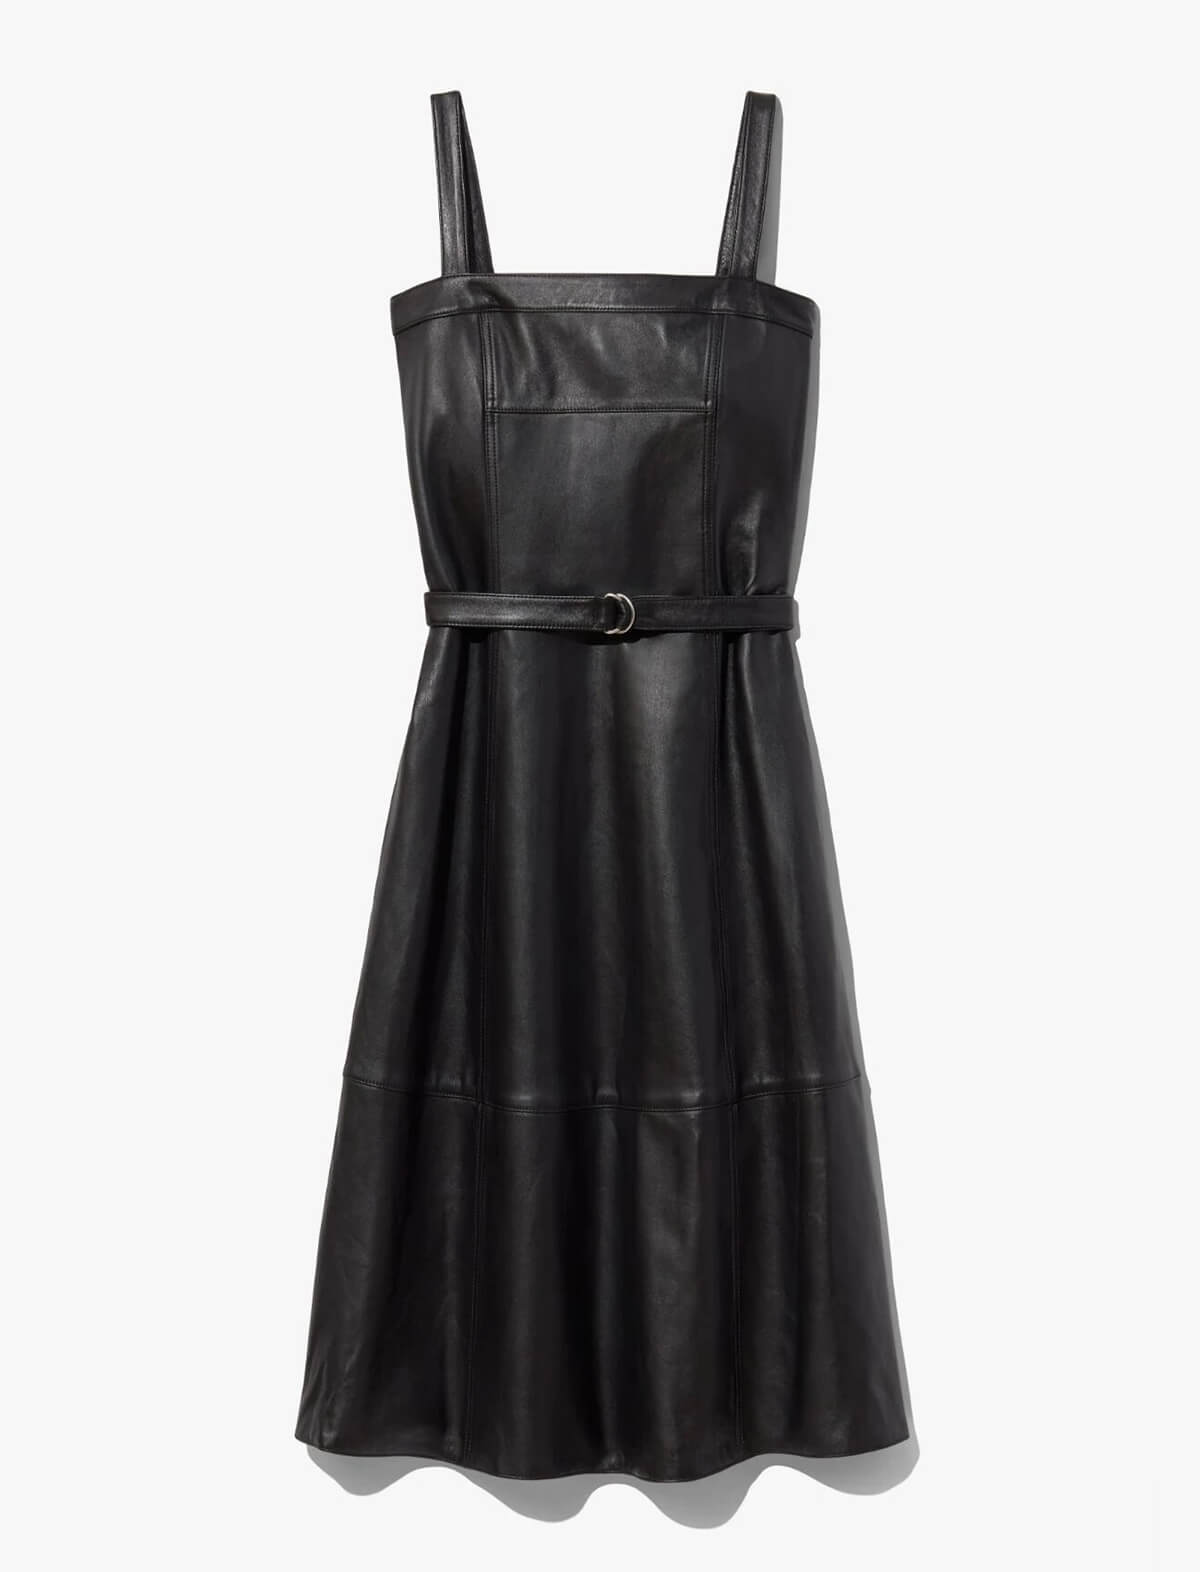 PROENZA SCHOULER WHITE LABEL Leather Belted Dress in Black